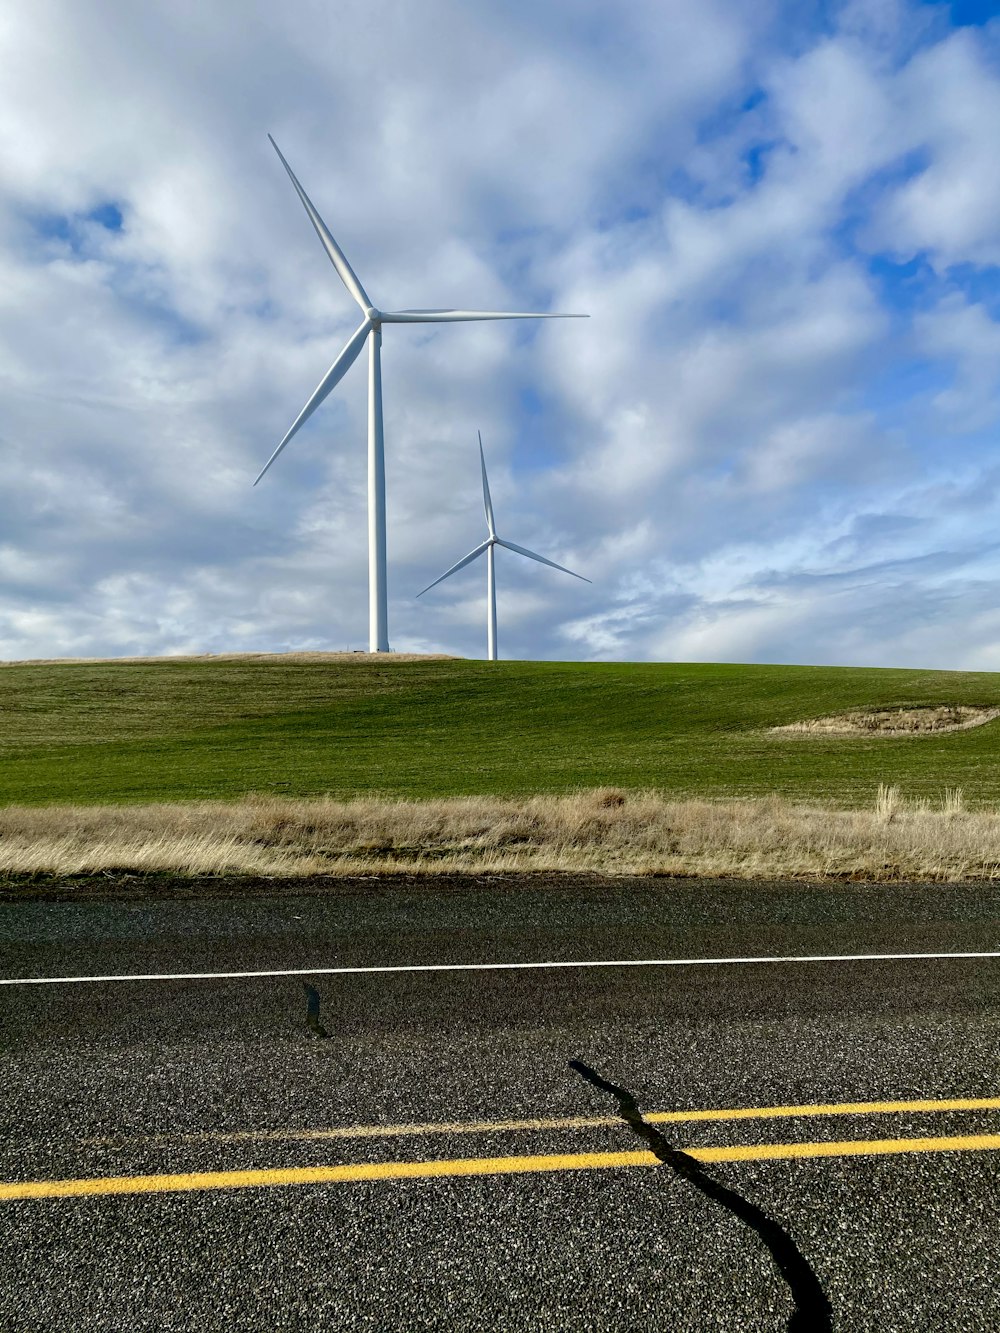 white wind turbines on green grass field under blue and white sunny cloudy sky during daytime